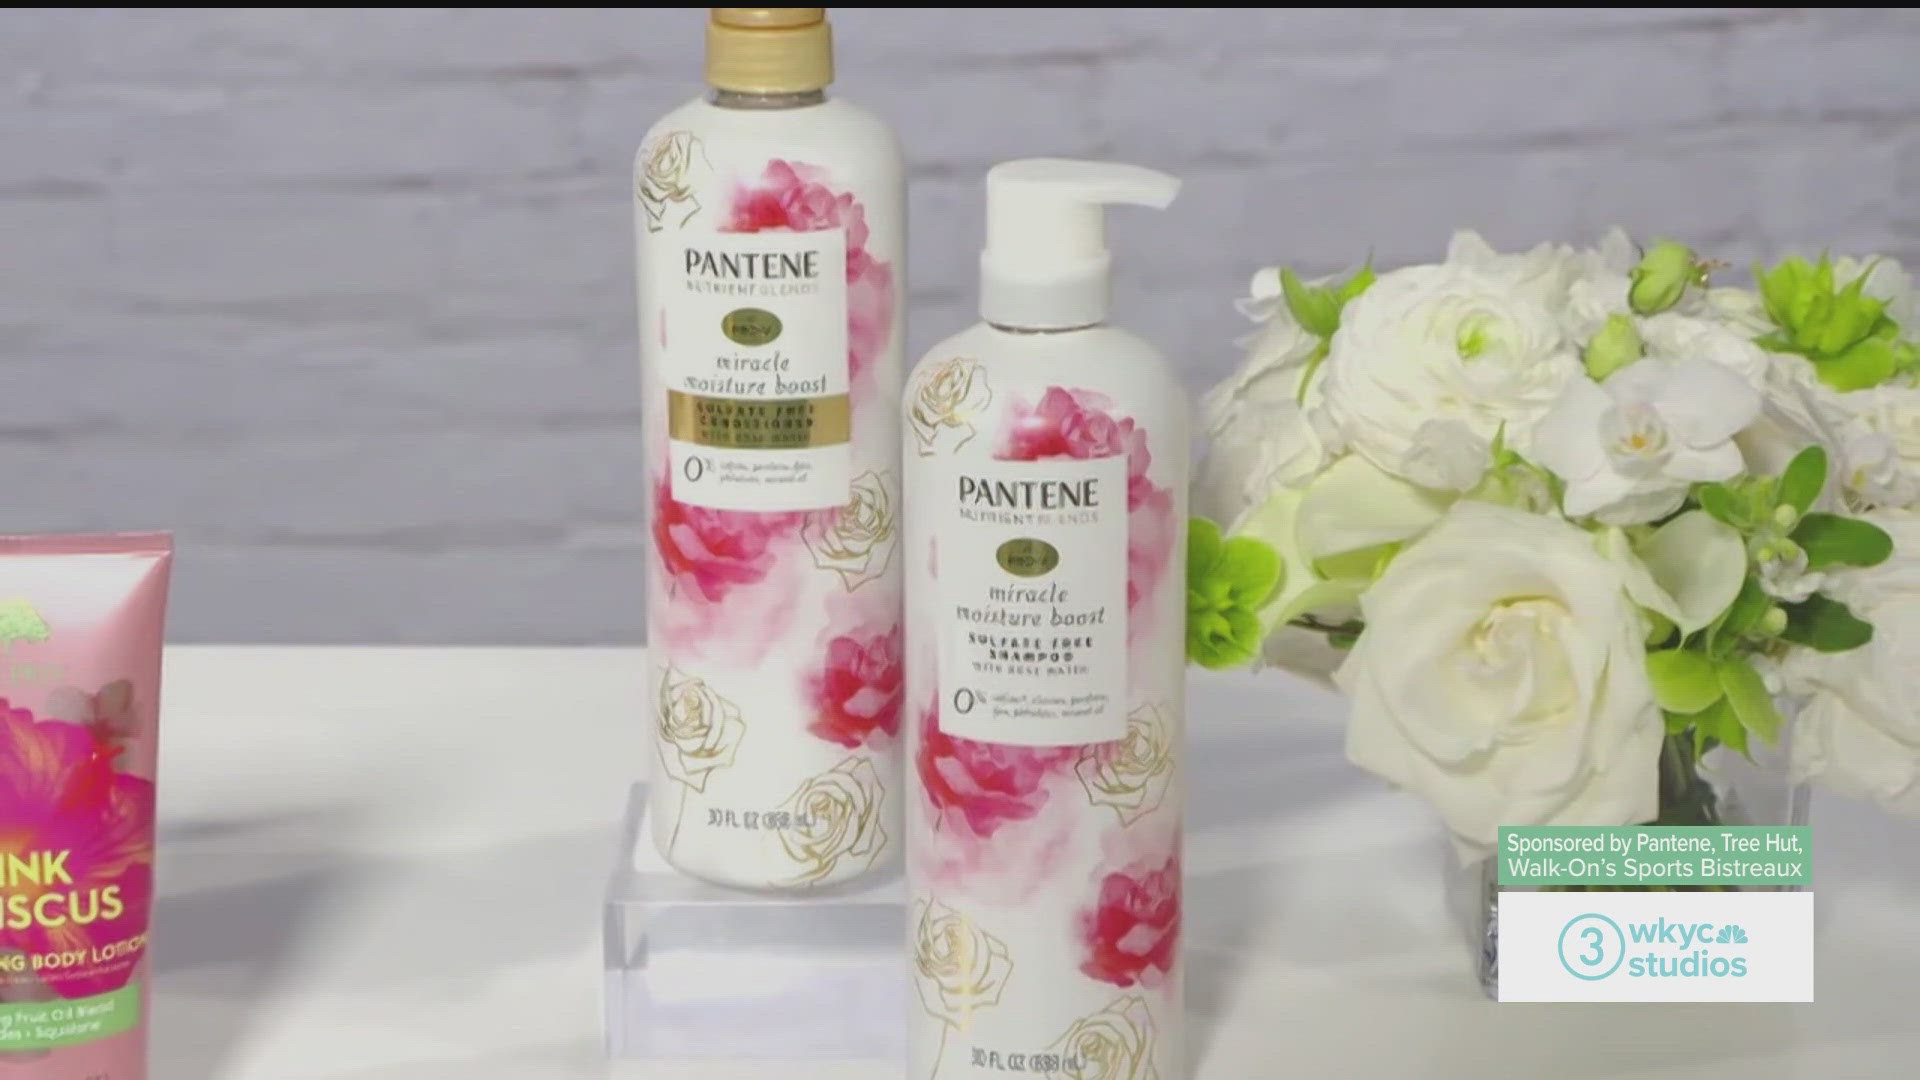 Katherine talks with Joann Butler about items you can grab for mom this Mother's Day! Sponsored by: Pantene, Tree Hut, Walk-On’s Sports Bistreaux